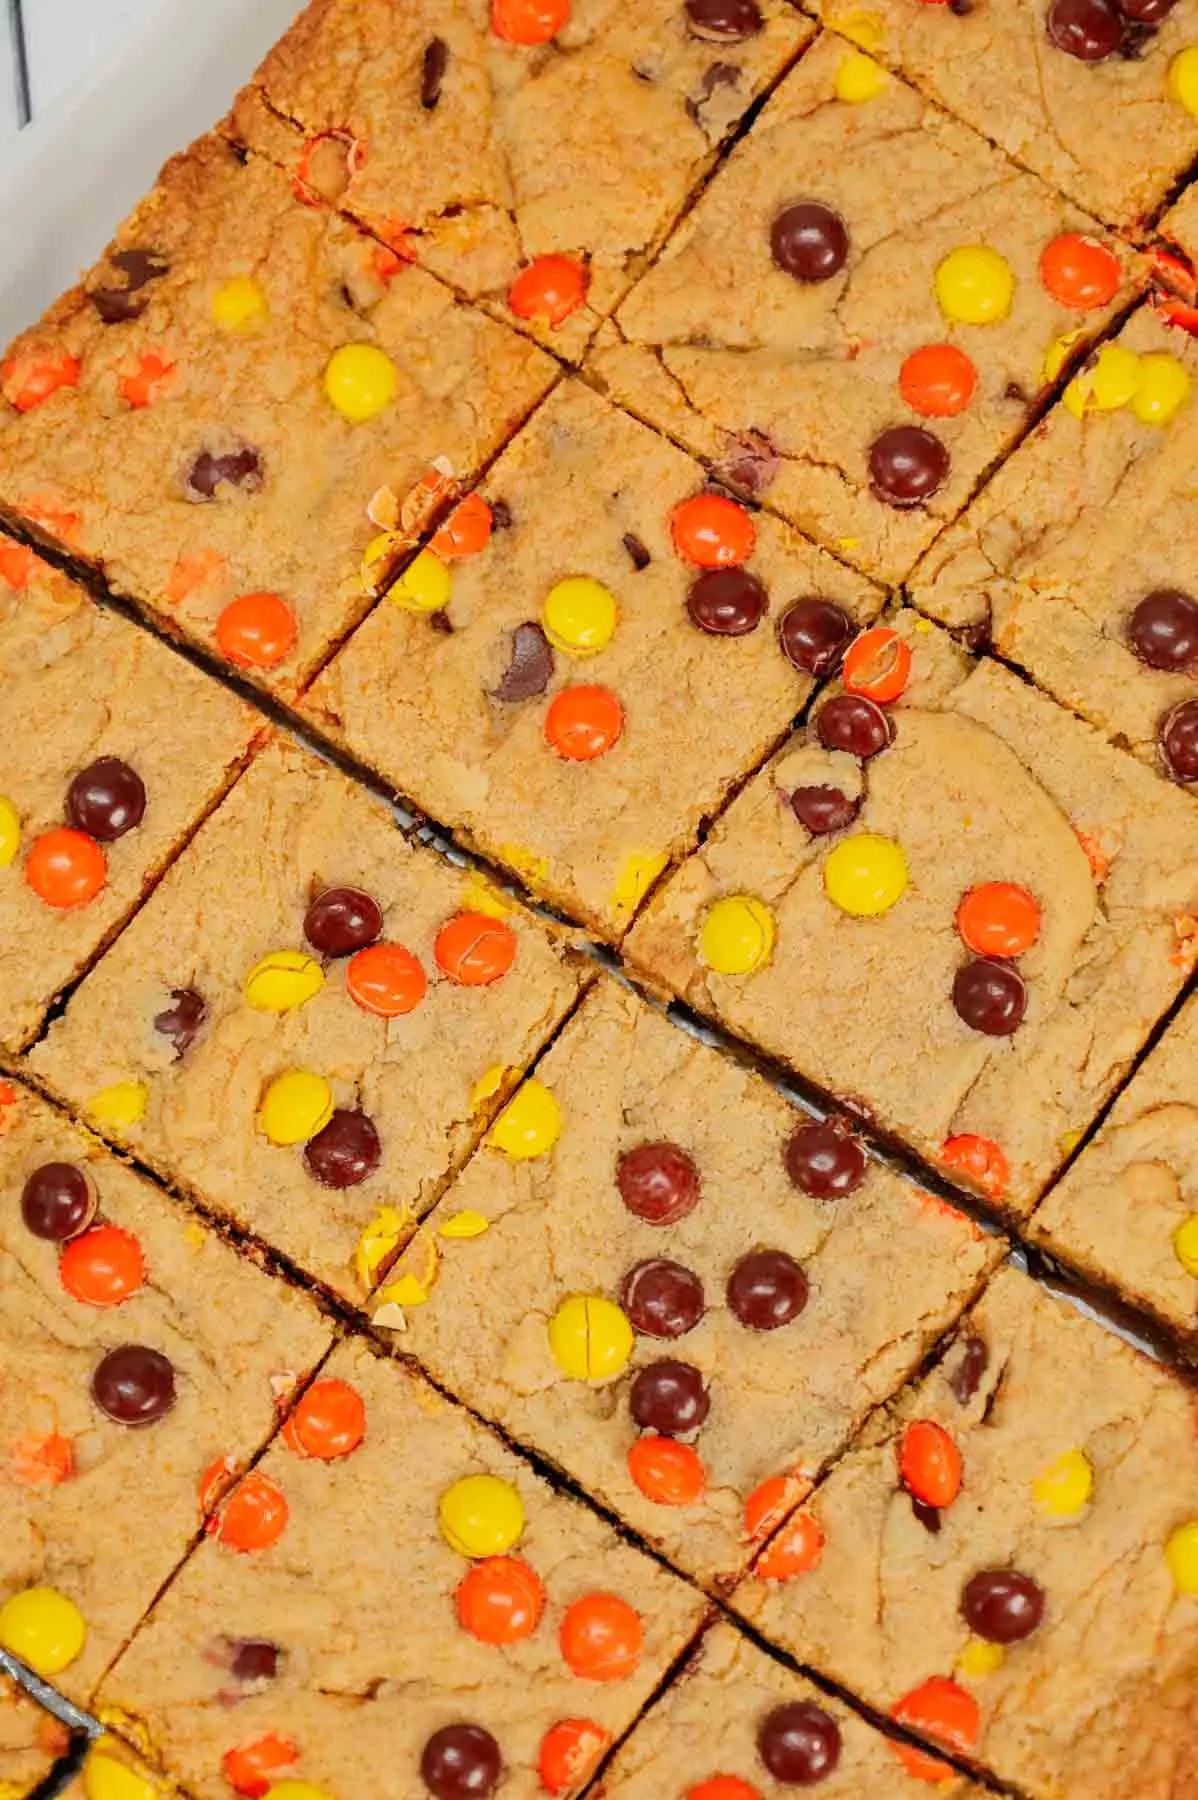 Peanut Butter Blondies are chewy peanut butter bars loaded with peanut butter baking chips, chocolate chips and mini Reese's pieces candies.